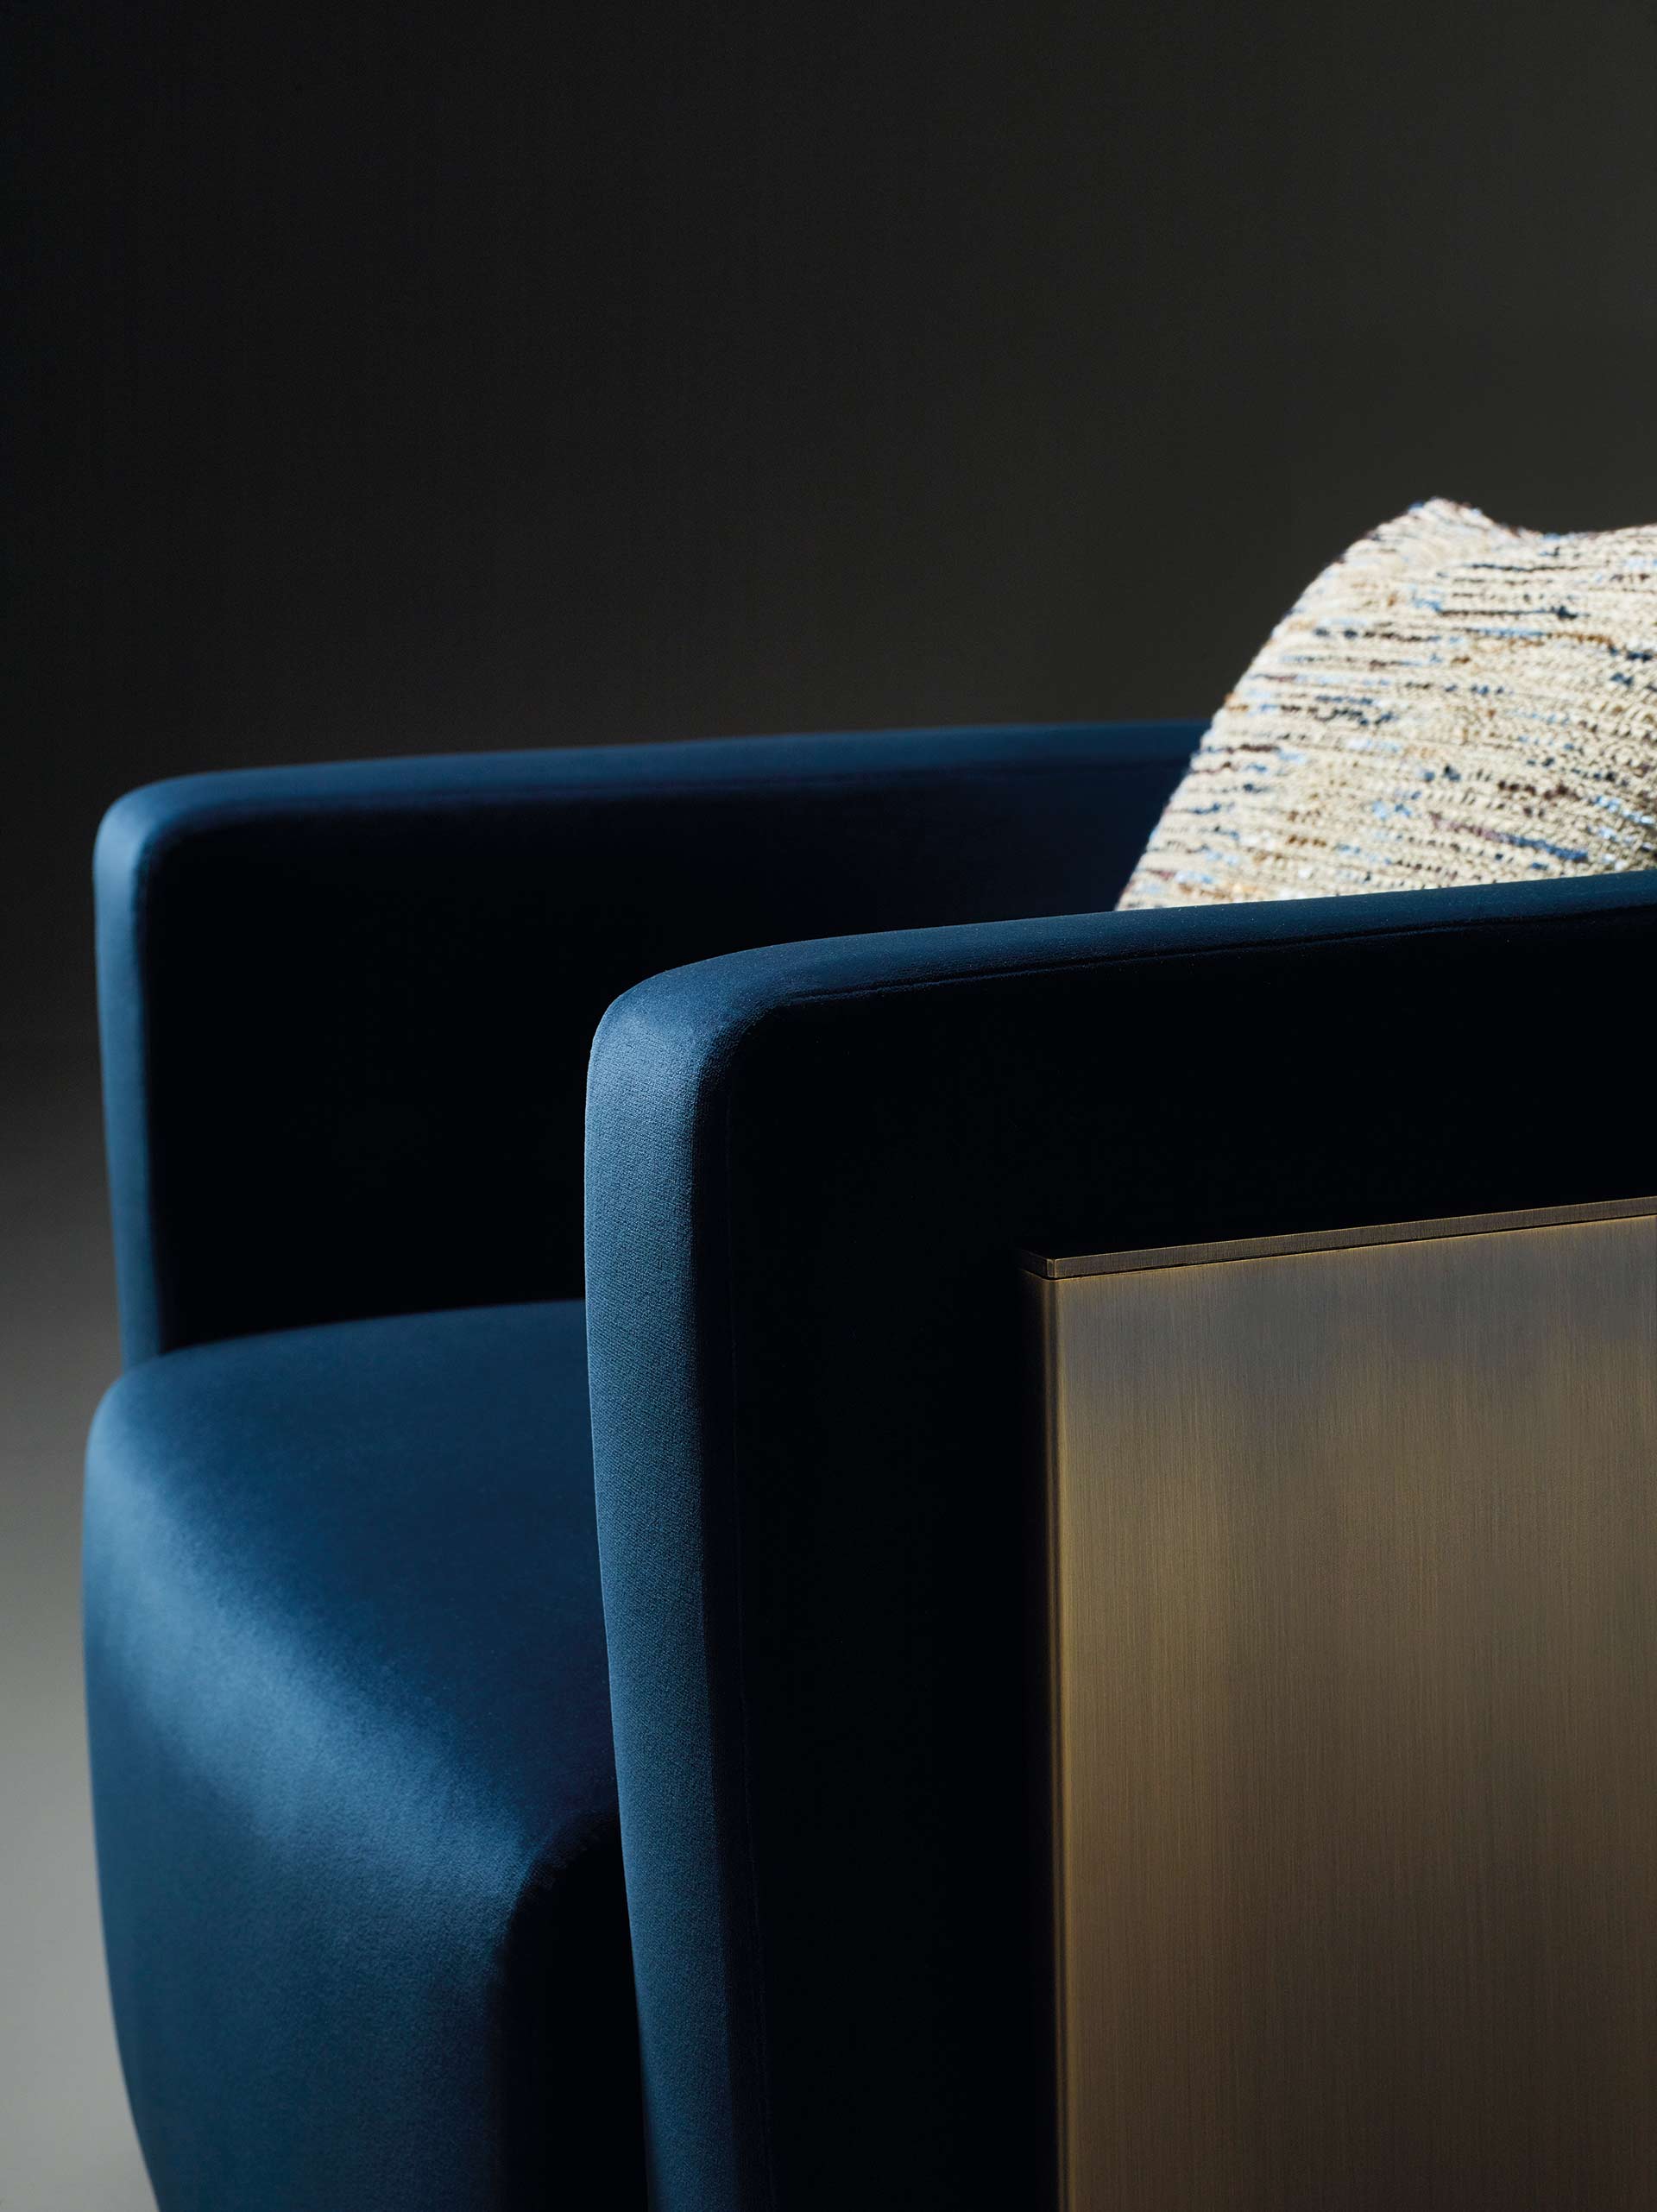 Detail of Pervinca, a swivel bronze armchair with a wooden base and fabric covering, from Promemoria's Amaranthine Tales collection | Promemoria